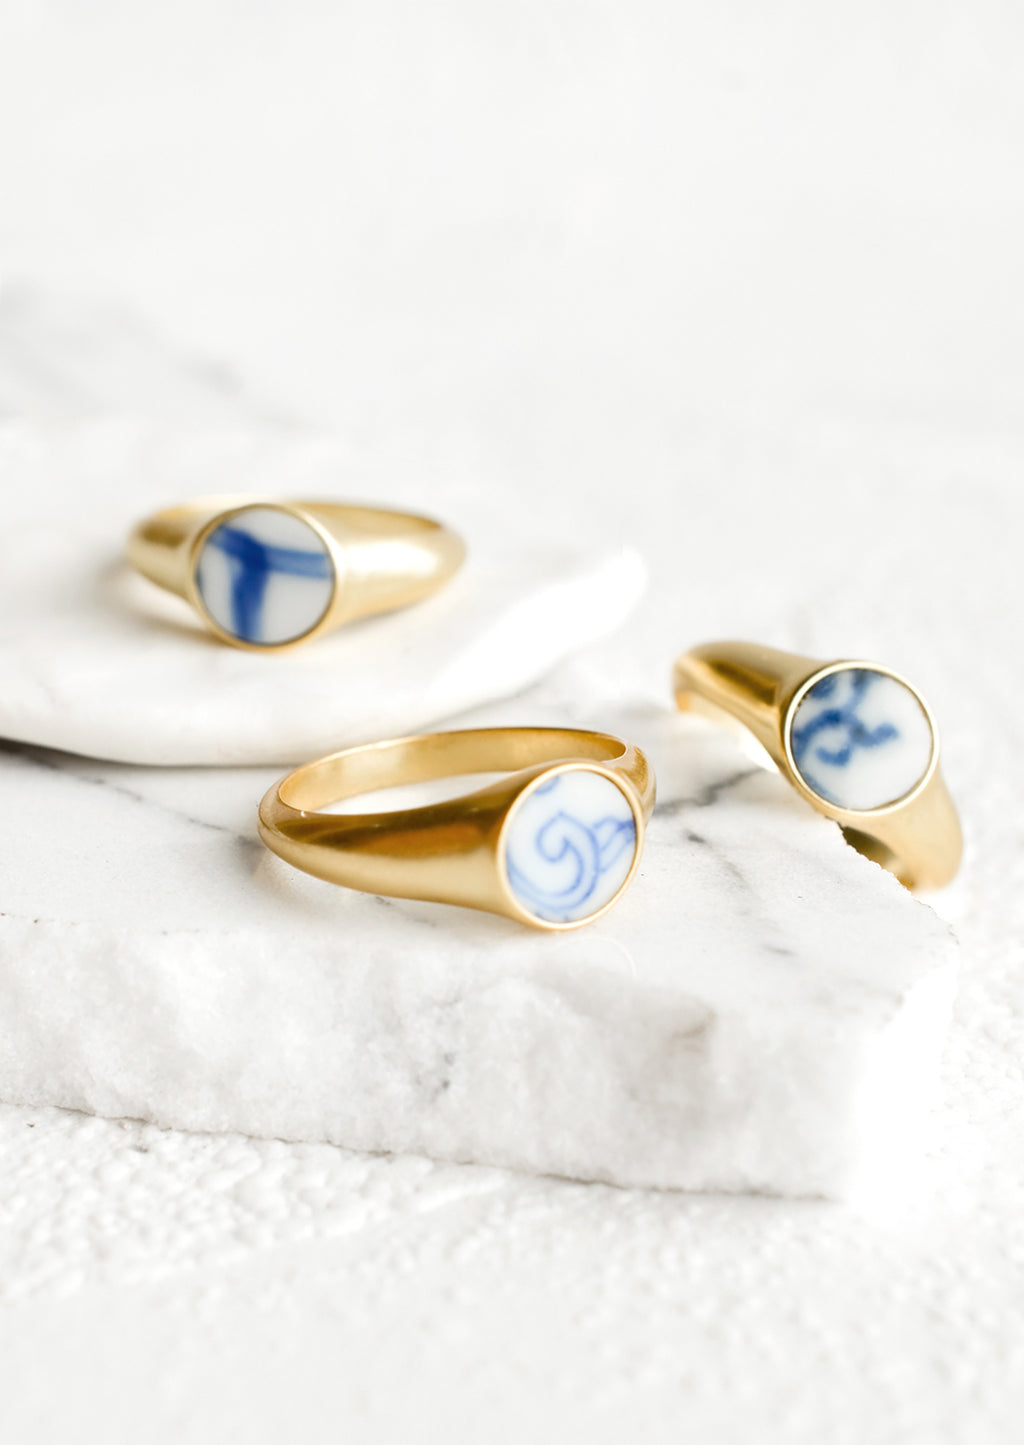 2: Gold signet rings with blue and white pottery signet.